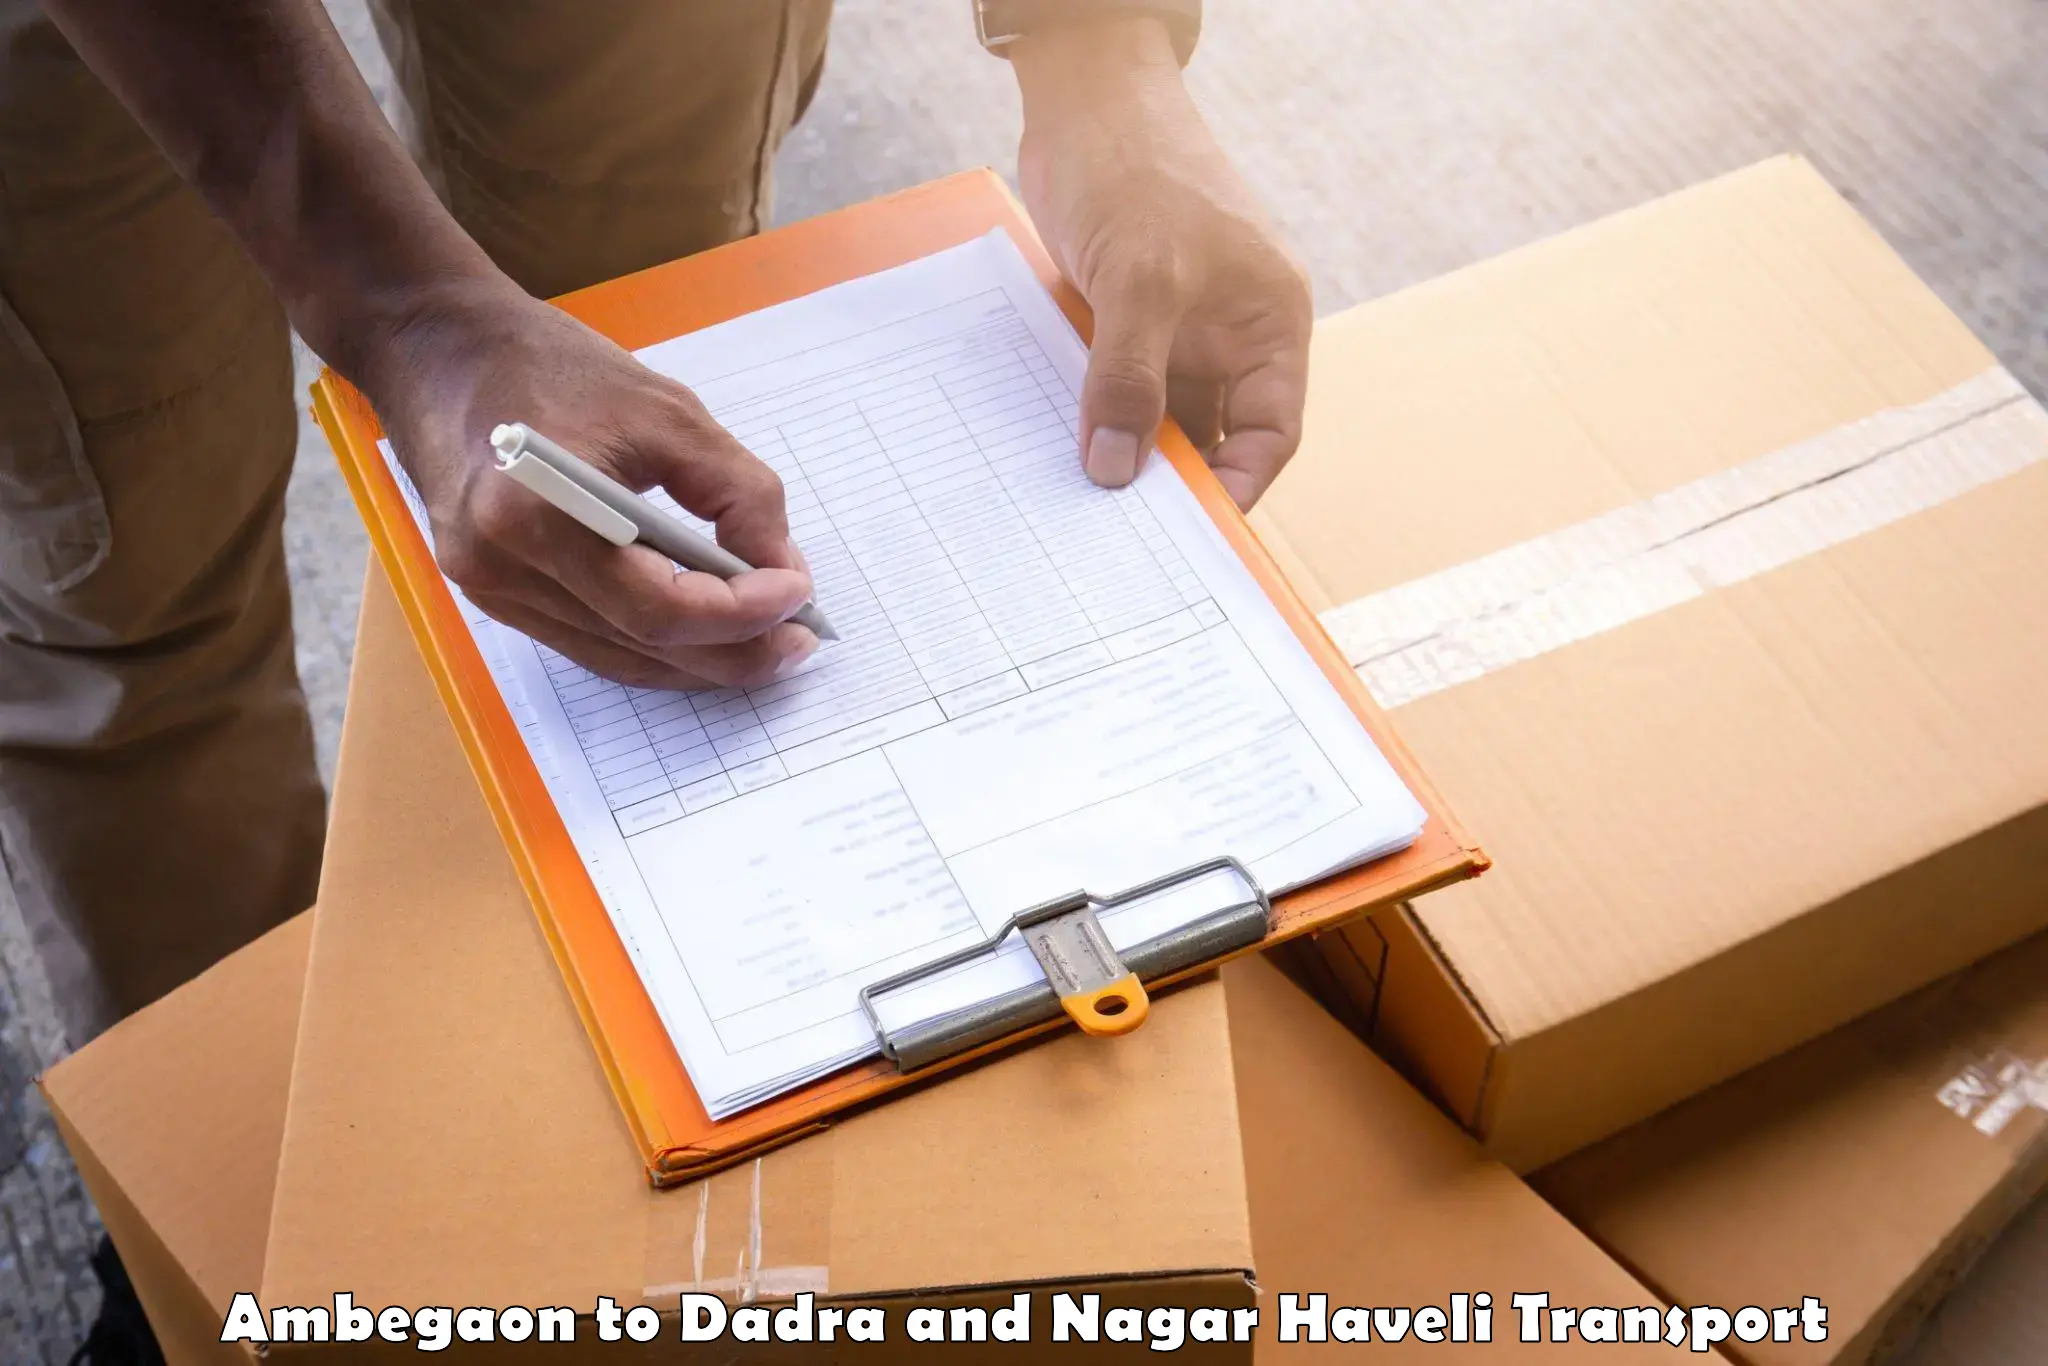 Road transport online services Ambegaon to Dadra and Nagar Haveli